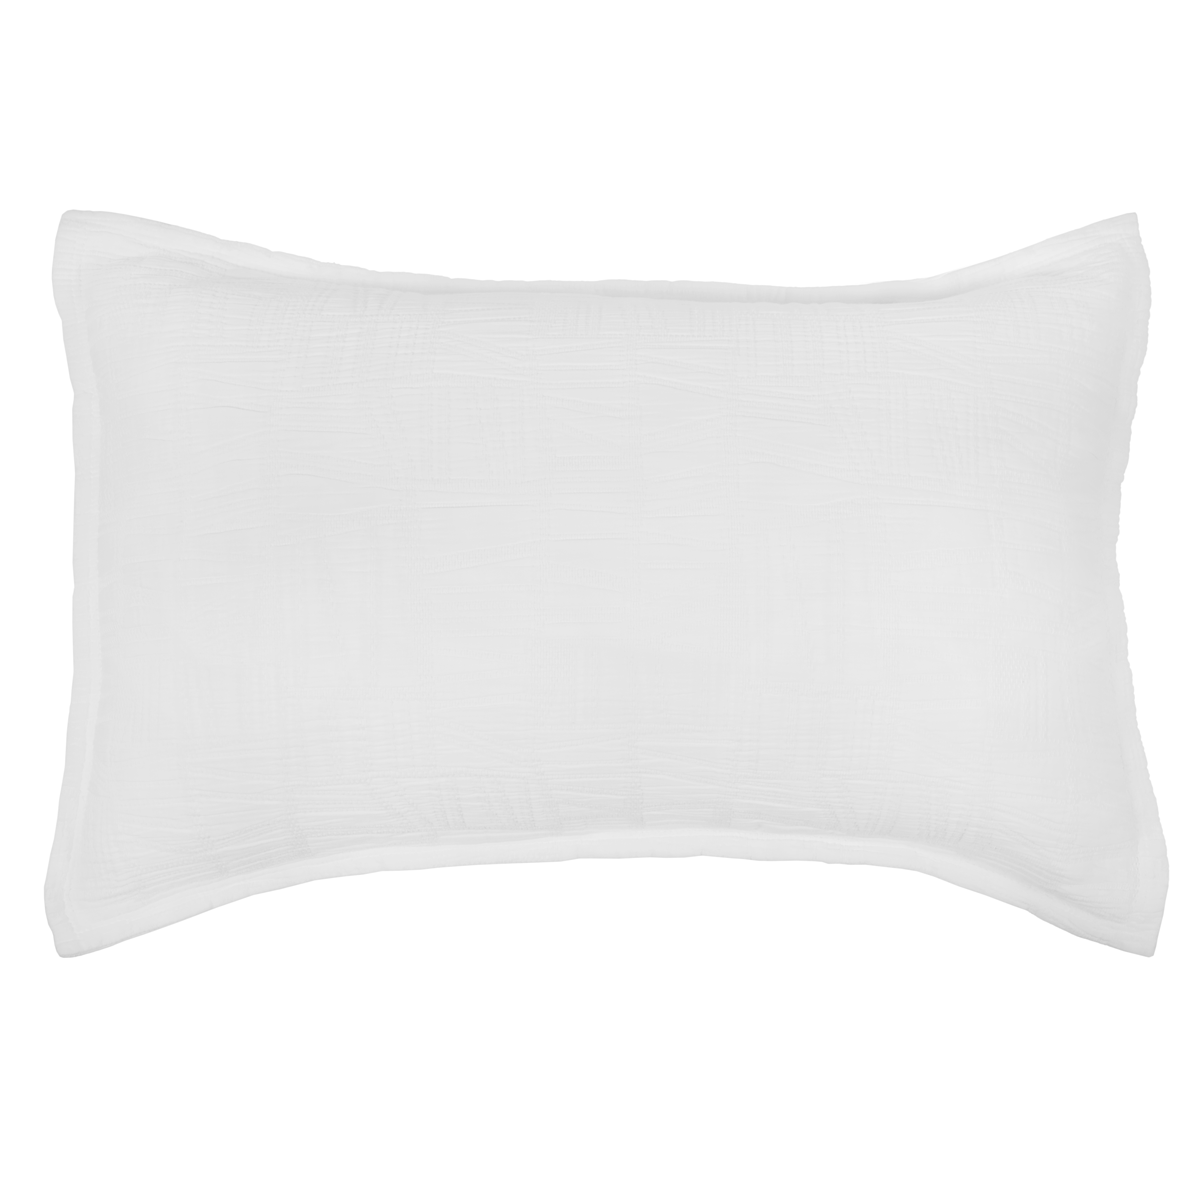 Harbour Matelasse Collection - White